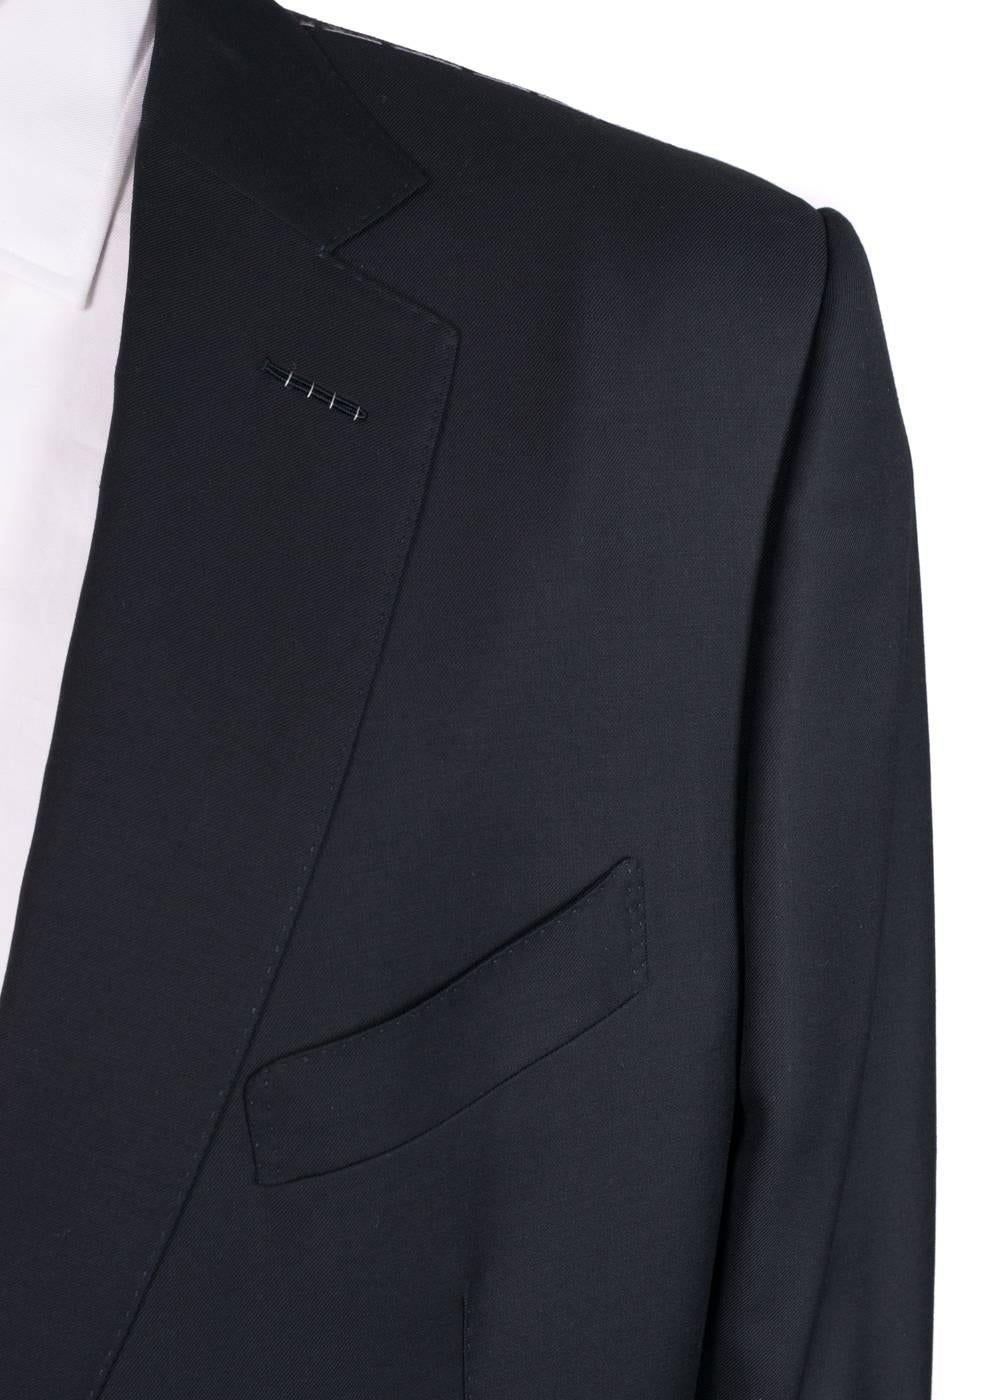 Brand New Tom Ford Pick Stitched 2-Piece Suit
Original Tags & hanger Included
Retails in Stores & Online for $4430
Men's Size EUR 62 R / US 52 R Fits True to Size

Tom Ford's Pick Stitched Suit is suitable for that upcoming occasion. This high